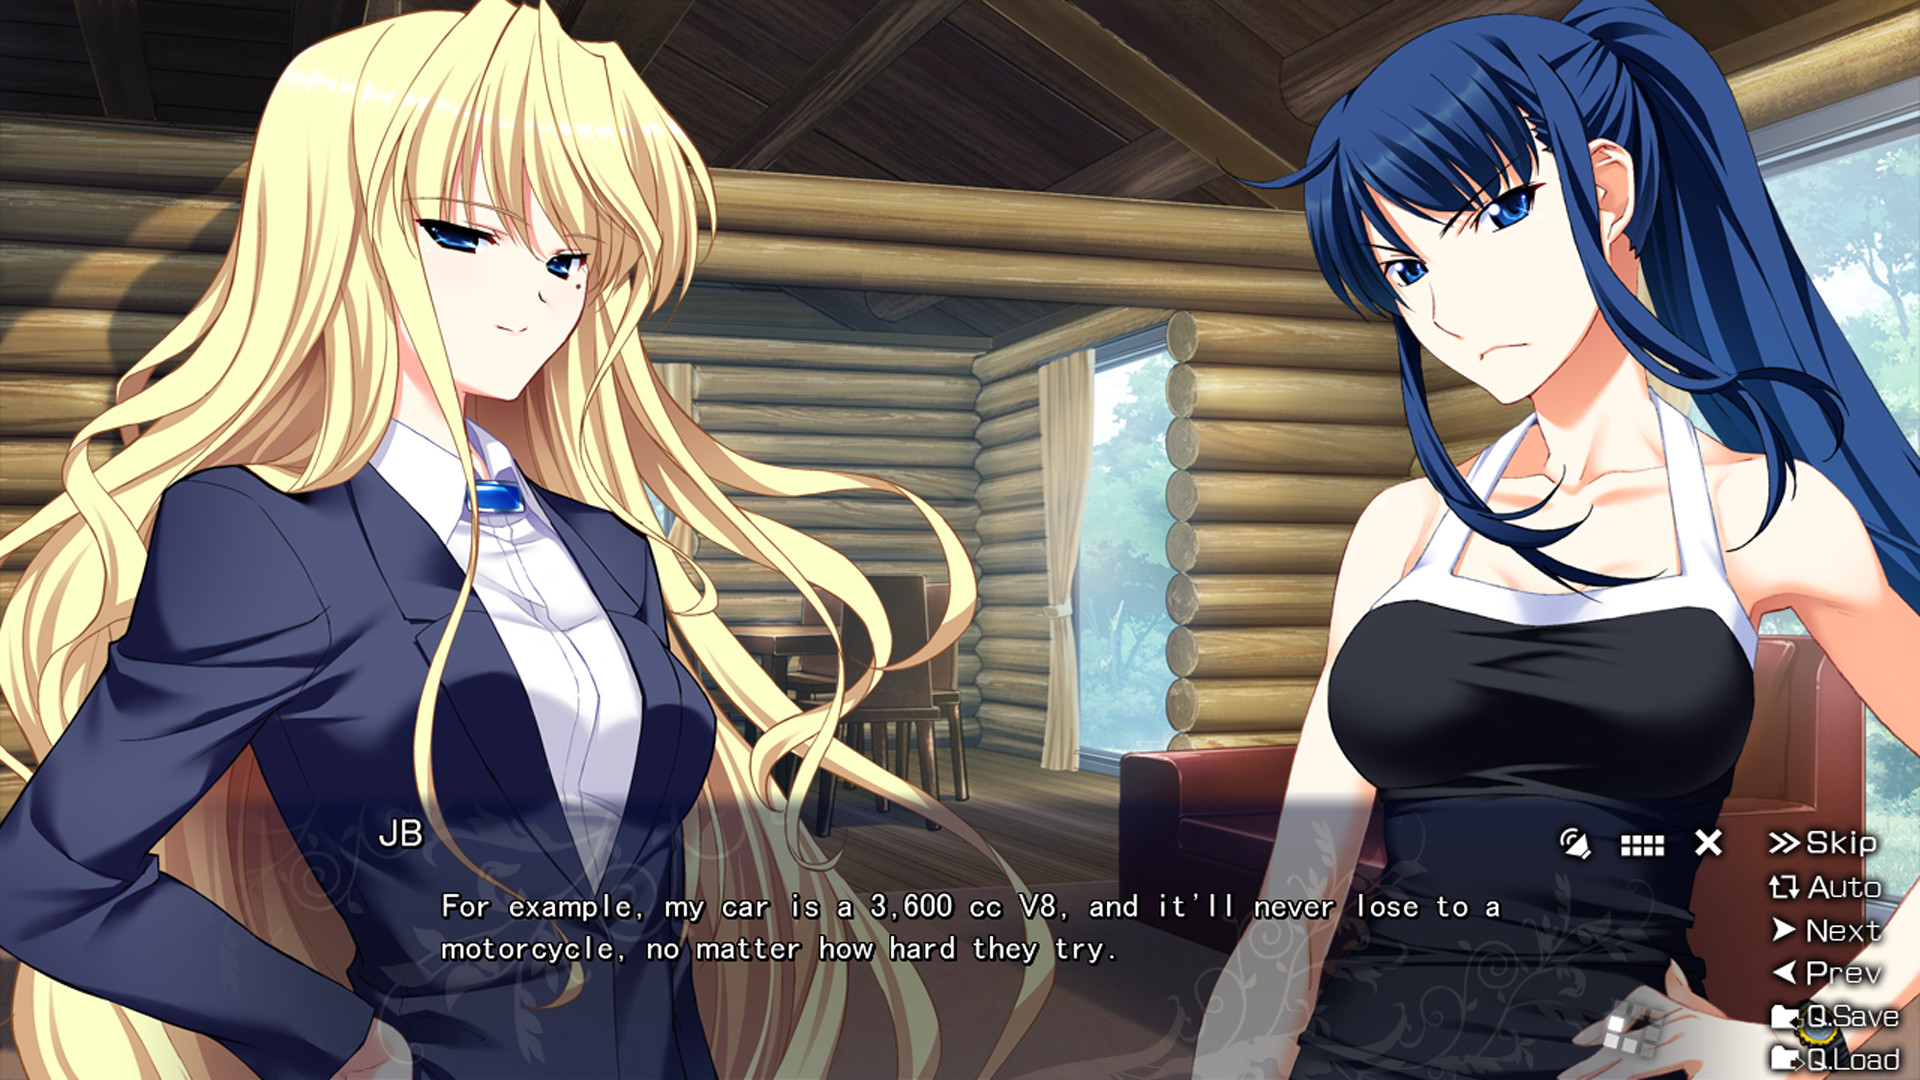 The Afterglow of Grisaia screenshot